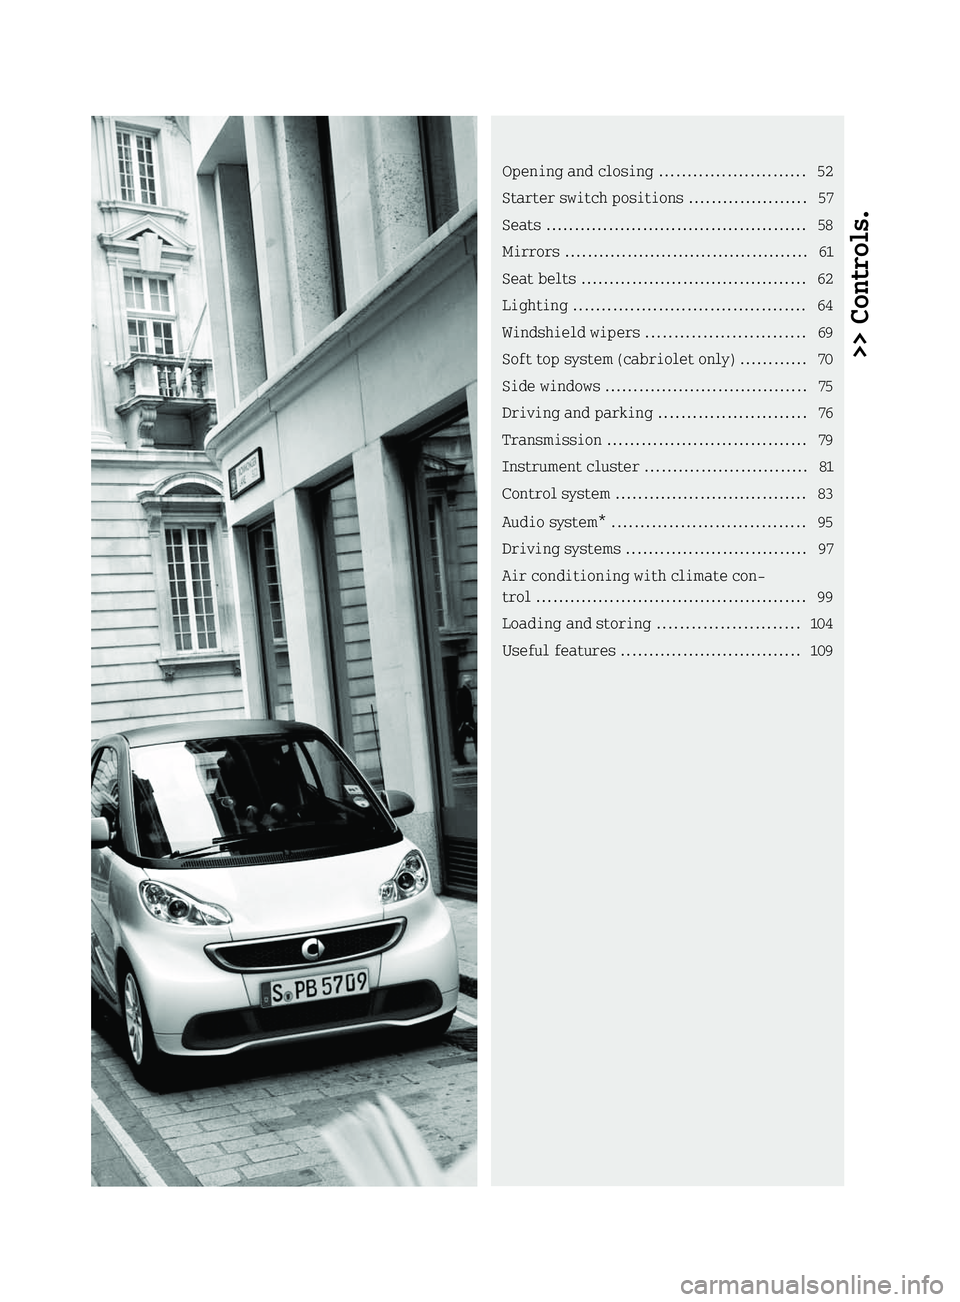 SMART FORTWO COUPE ELECTRIC DRIVE 2014 Workshop Manual >> Controls.Opening and closing
.......................... 52
Starter switch positions .....................57
Seats .............................................. 58
Mirrors .........................